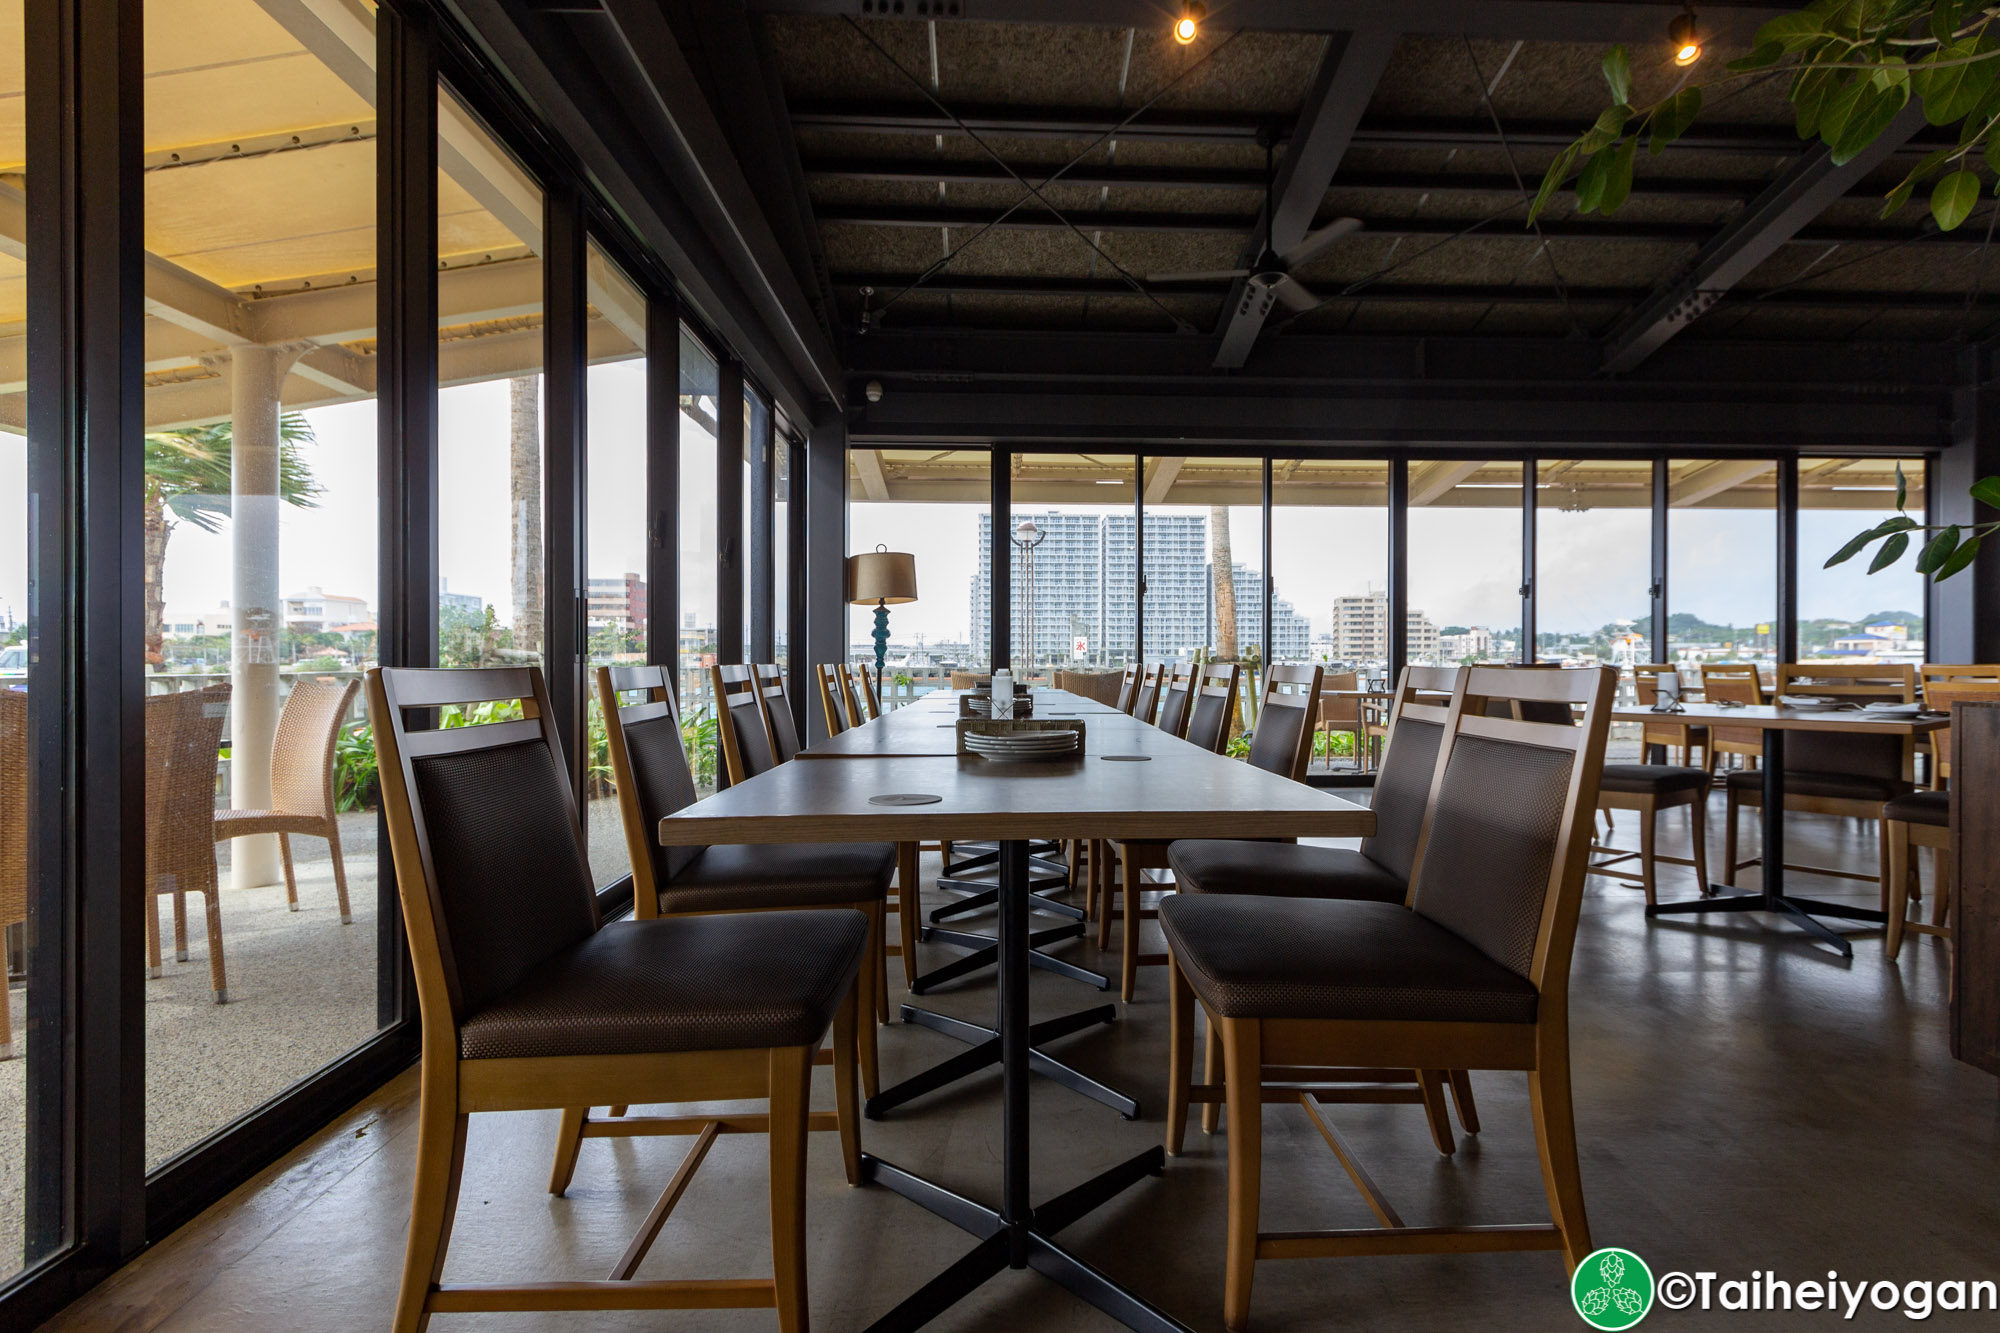 Chatan Harbor Brewery - Interior - Restaurant Section - Table Seating